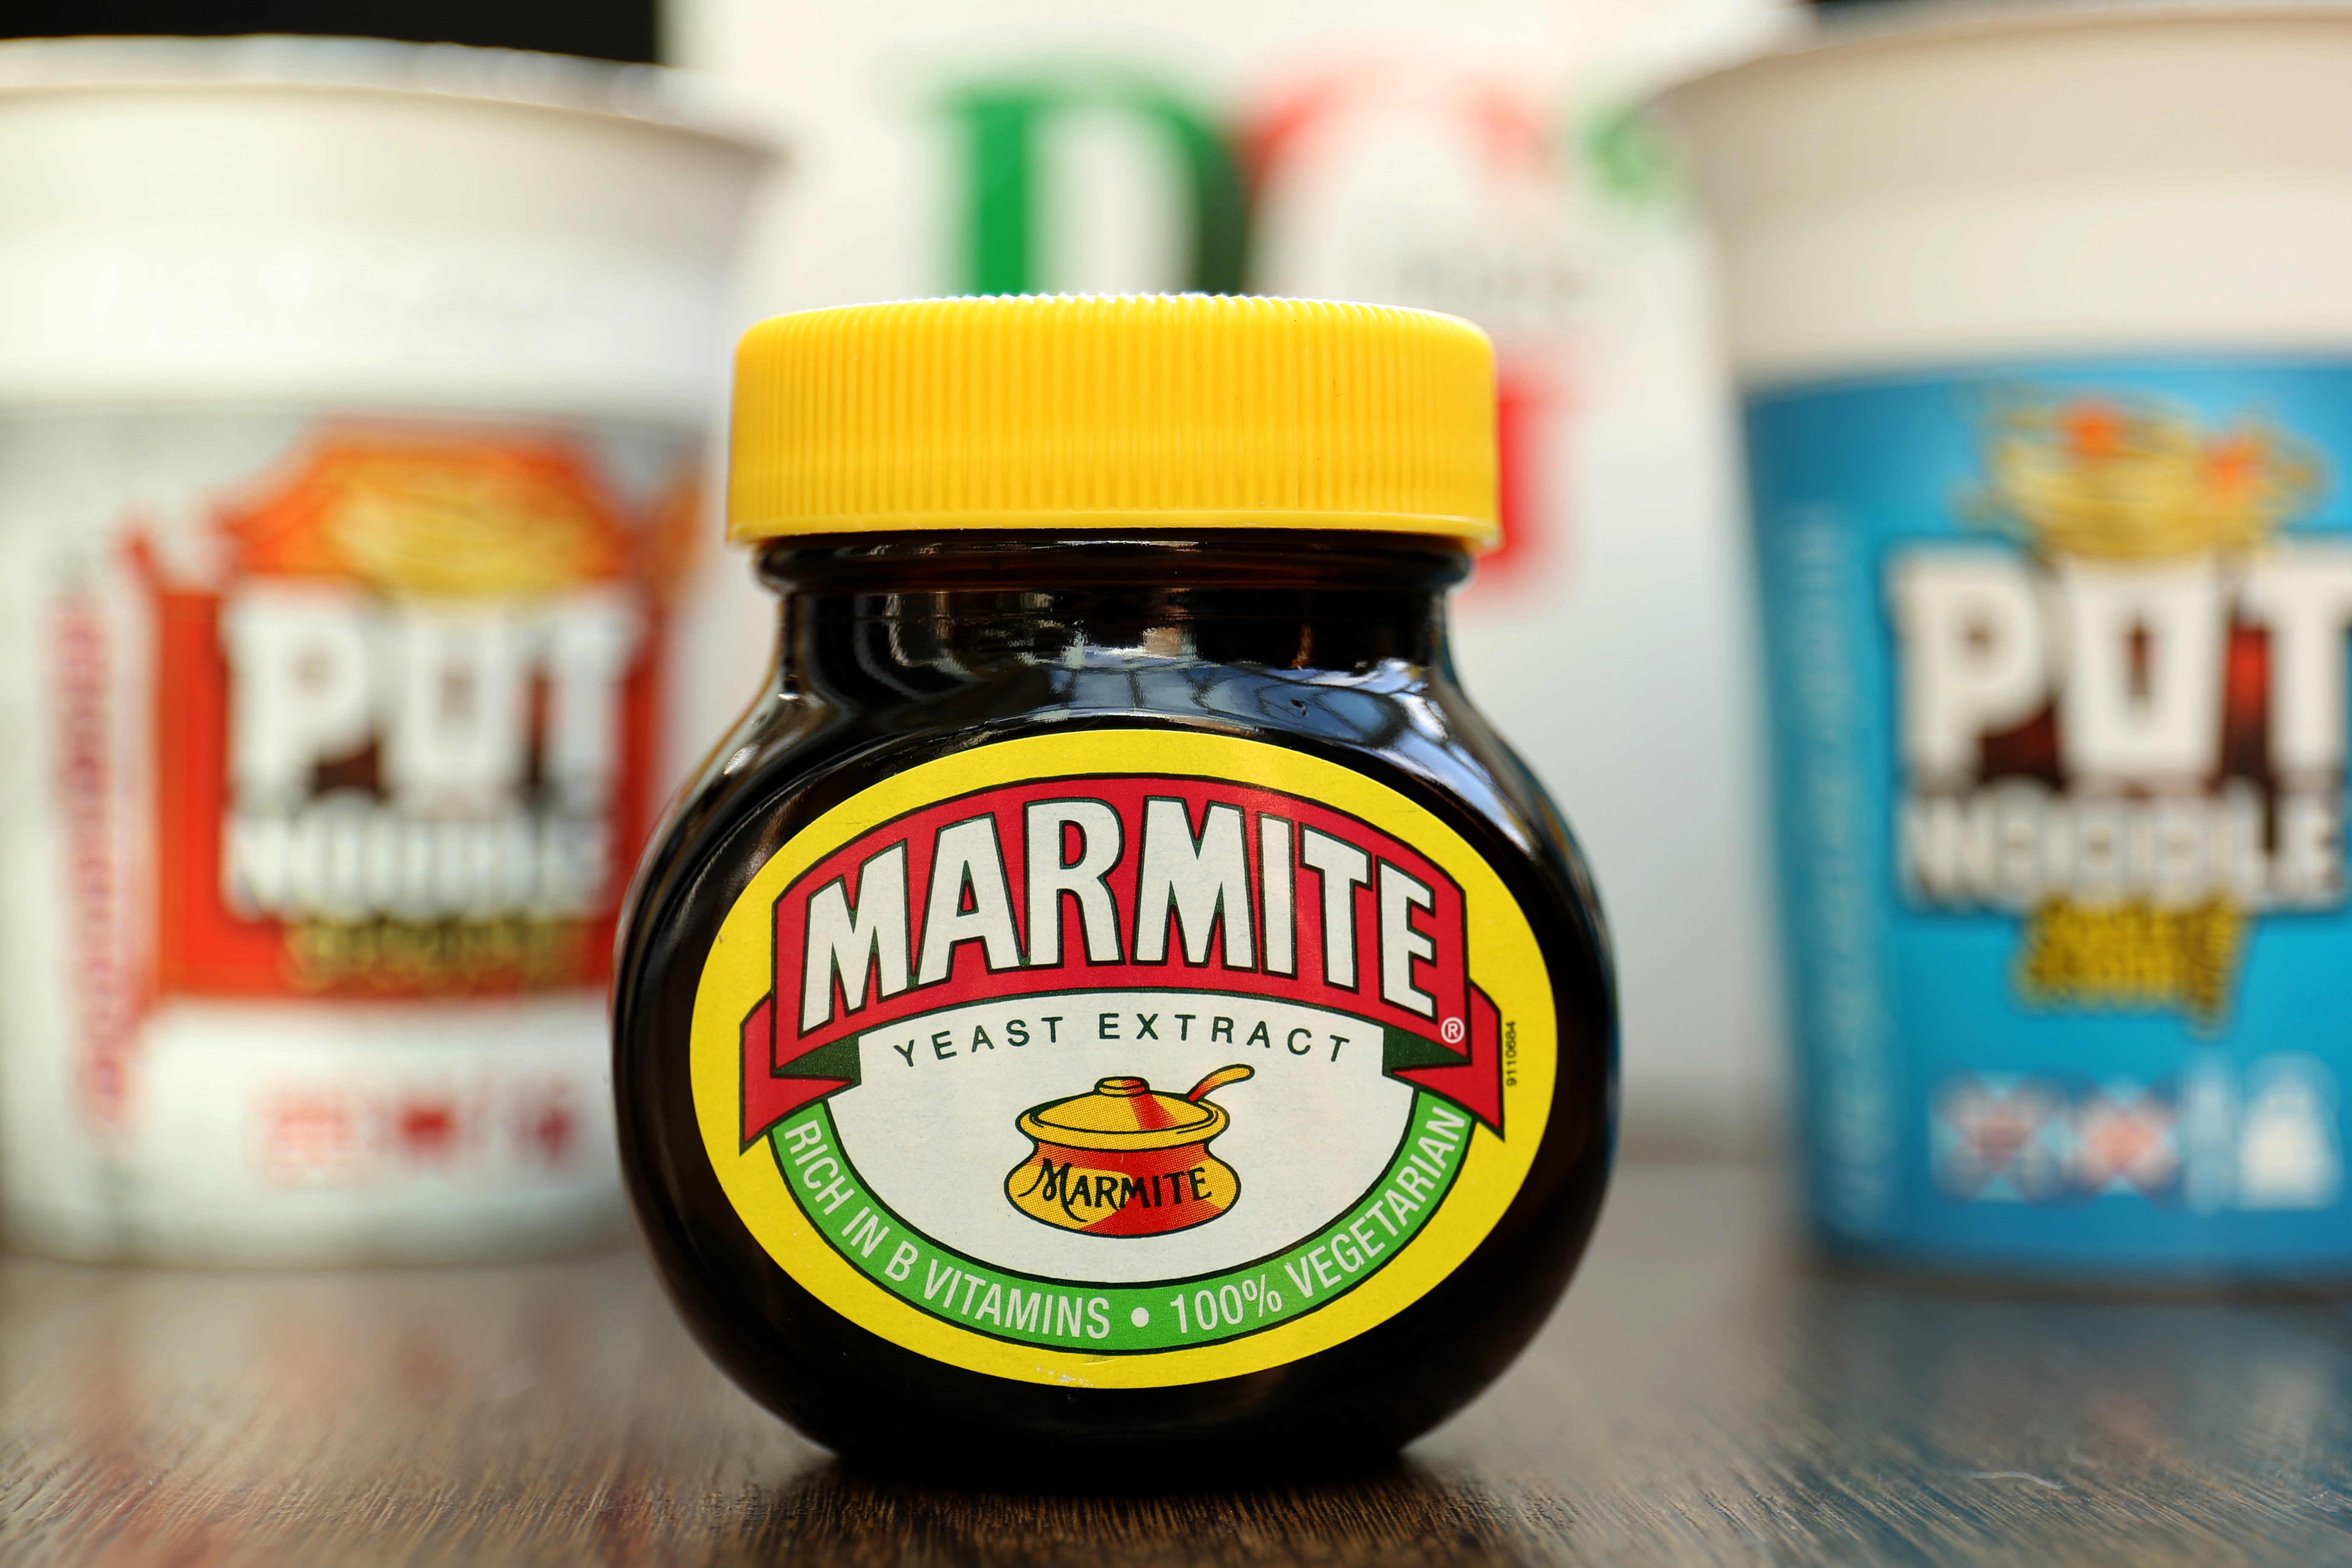 A Jar of Marmite and other Unilever products (Chris Radburn/PA)